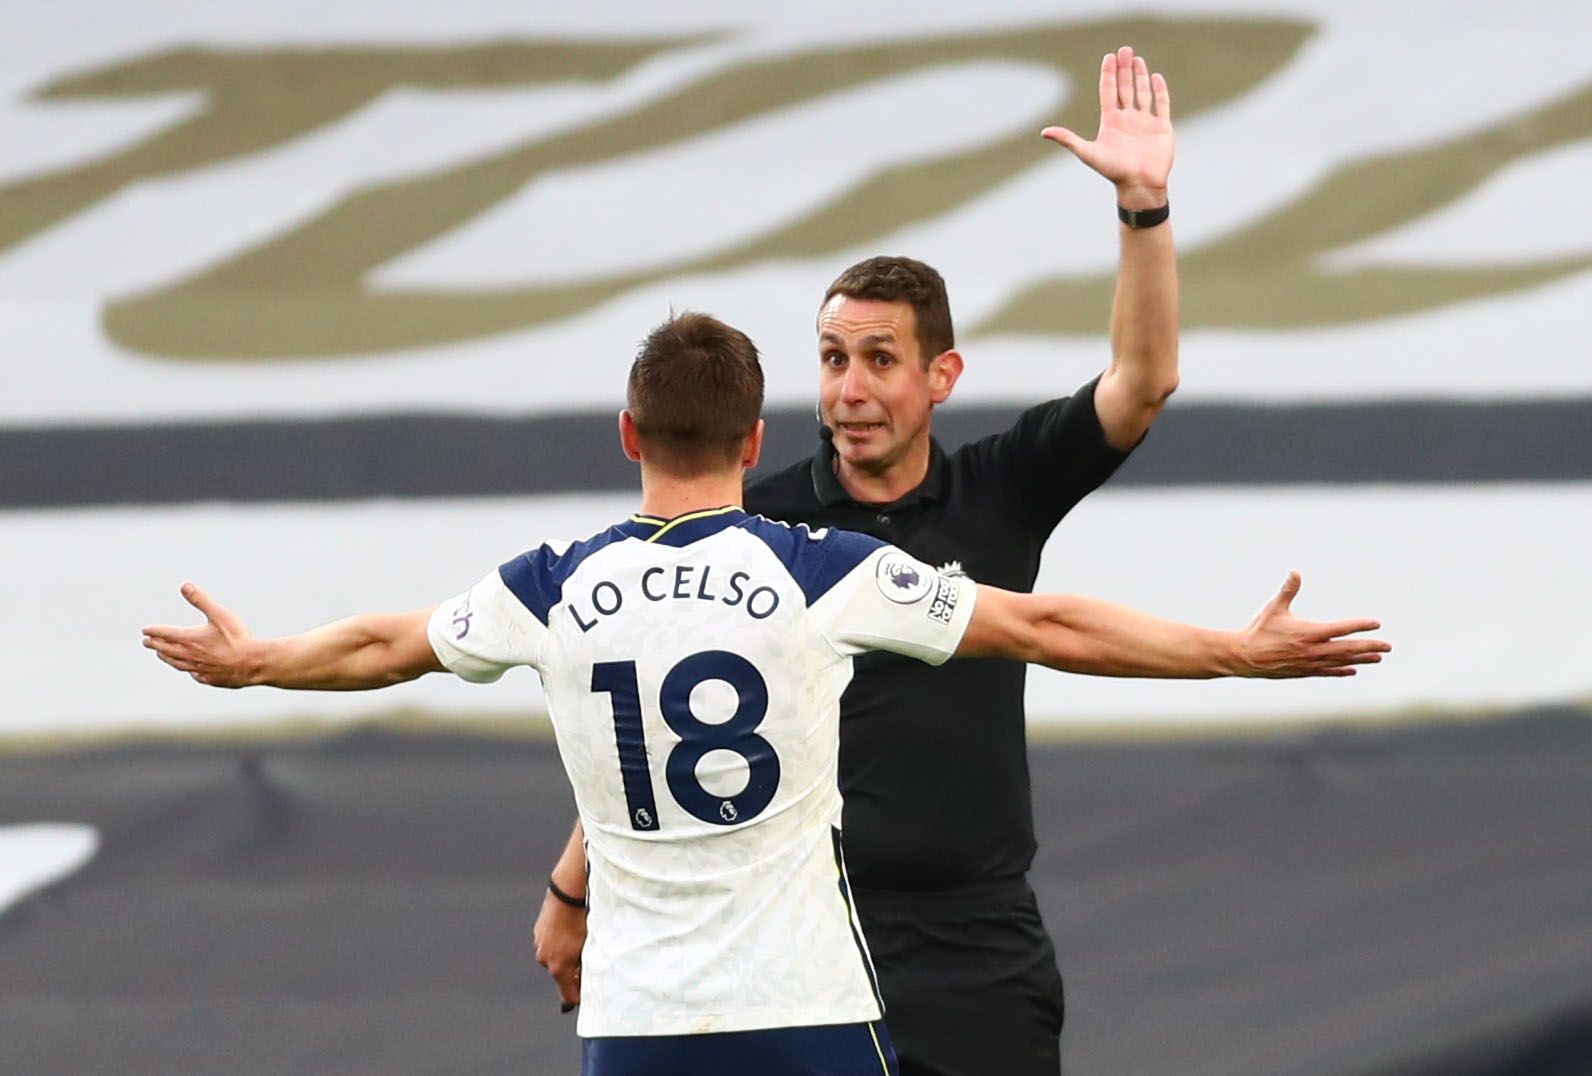 Soccer Football - Premier League - Tottenham Hotspur v Southampton - Tottenham Hotspur Stadium, London, Britain - April 21, 2021 Tottenham Hotspur's Giovani Lo Celso remonstrates with referee David Coote Pool via REUTERS/Clive Rose EDITORIAL USE ONLY. No use with unauthorized audio, video, data, fixture lists, club/league logos or 'live' services. Online in-match use limited to 75 images, no video emulation. No use in betting, games or single club /league/player publications.  Please contact you